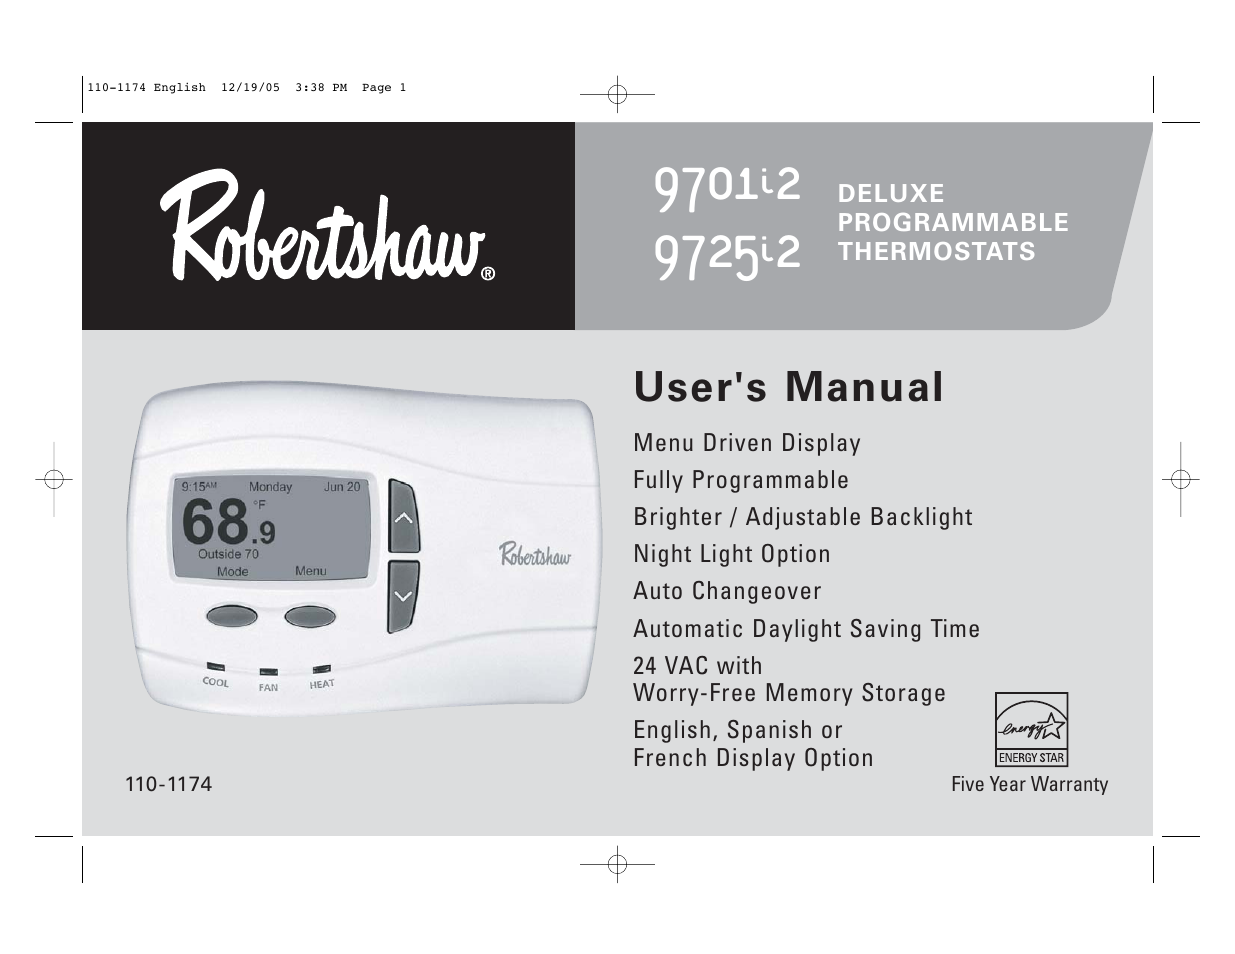 Robertshaw 9725i2 USERS MANUAL User Manual | 32 pages | Also for: 9701i2 USERS MANUAL1235 x 954